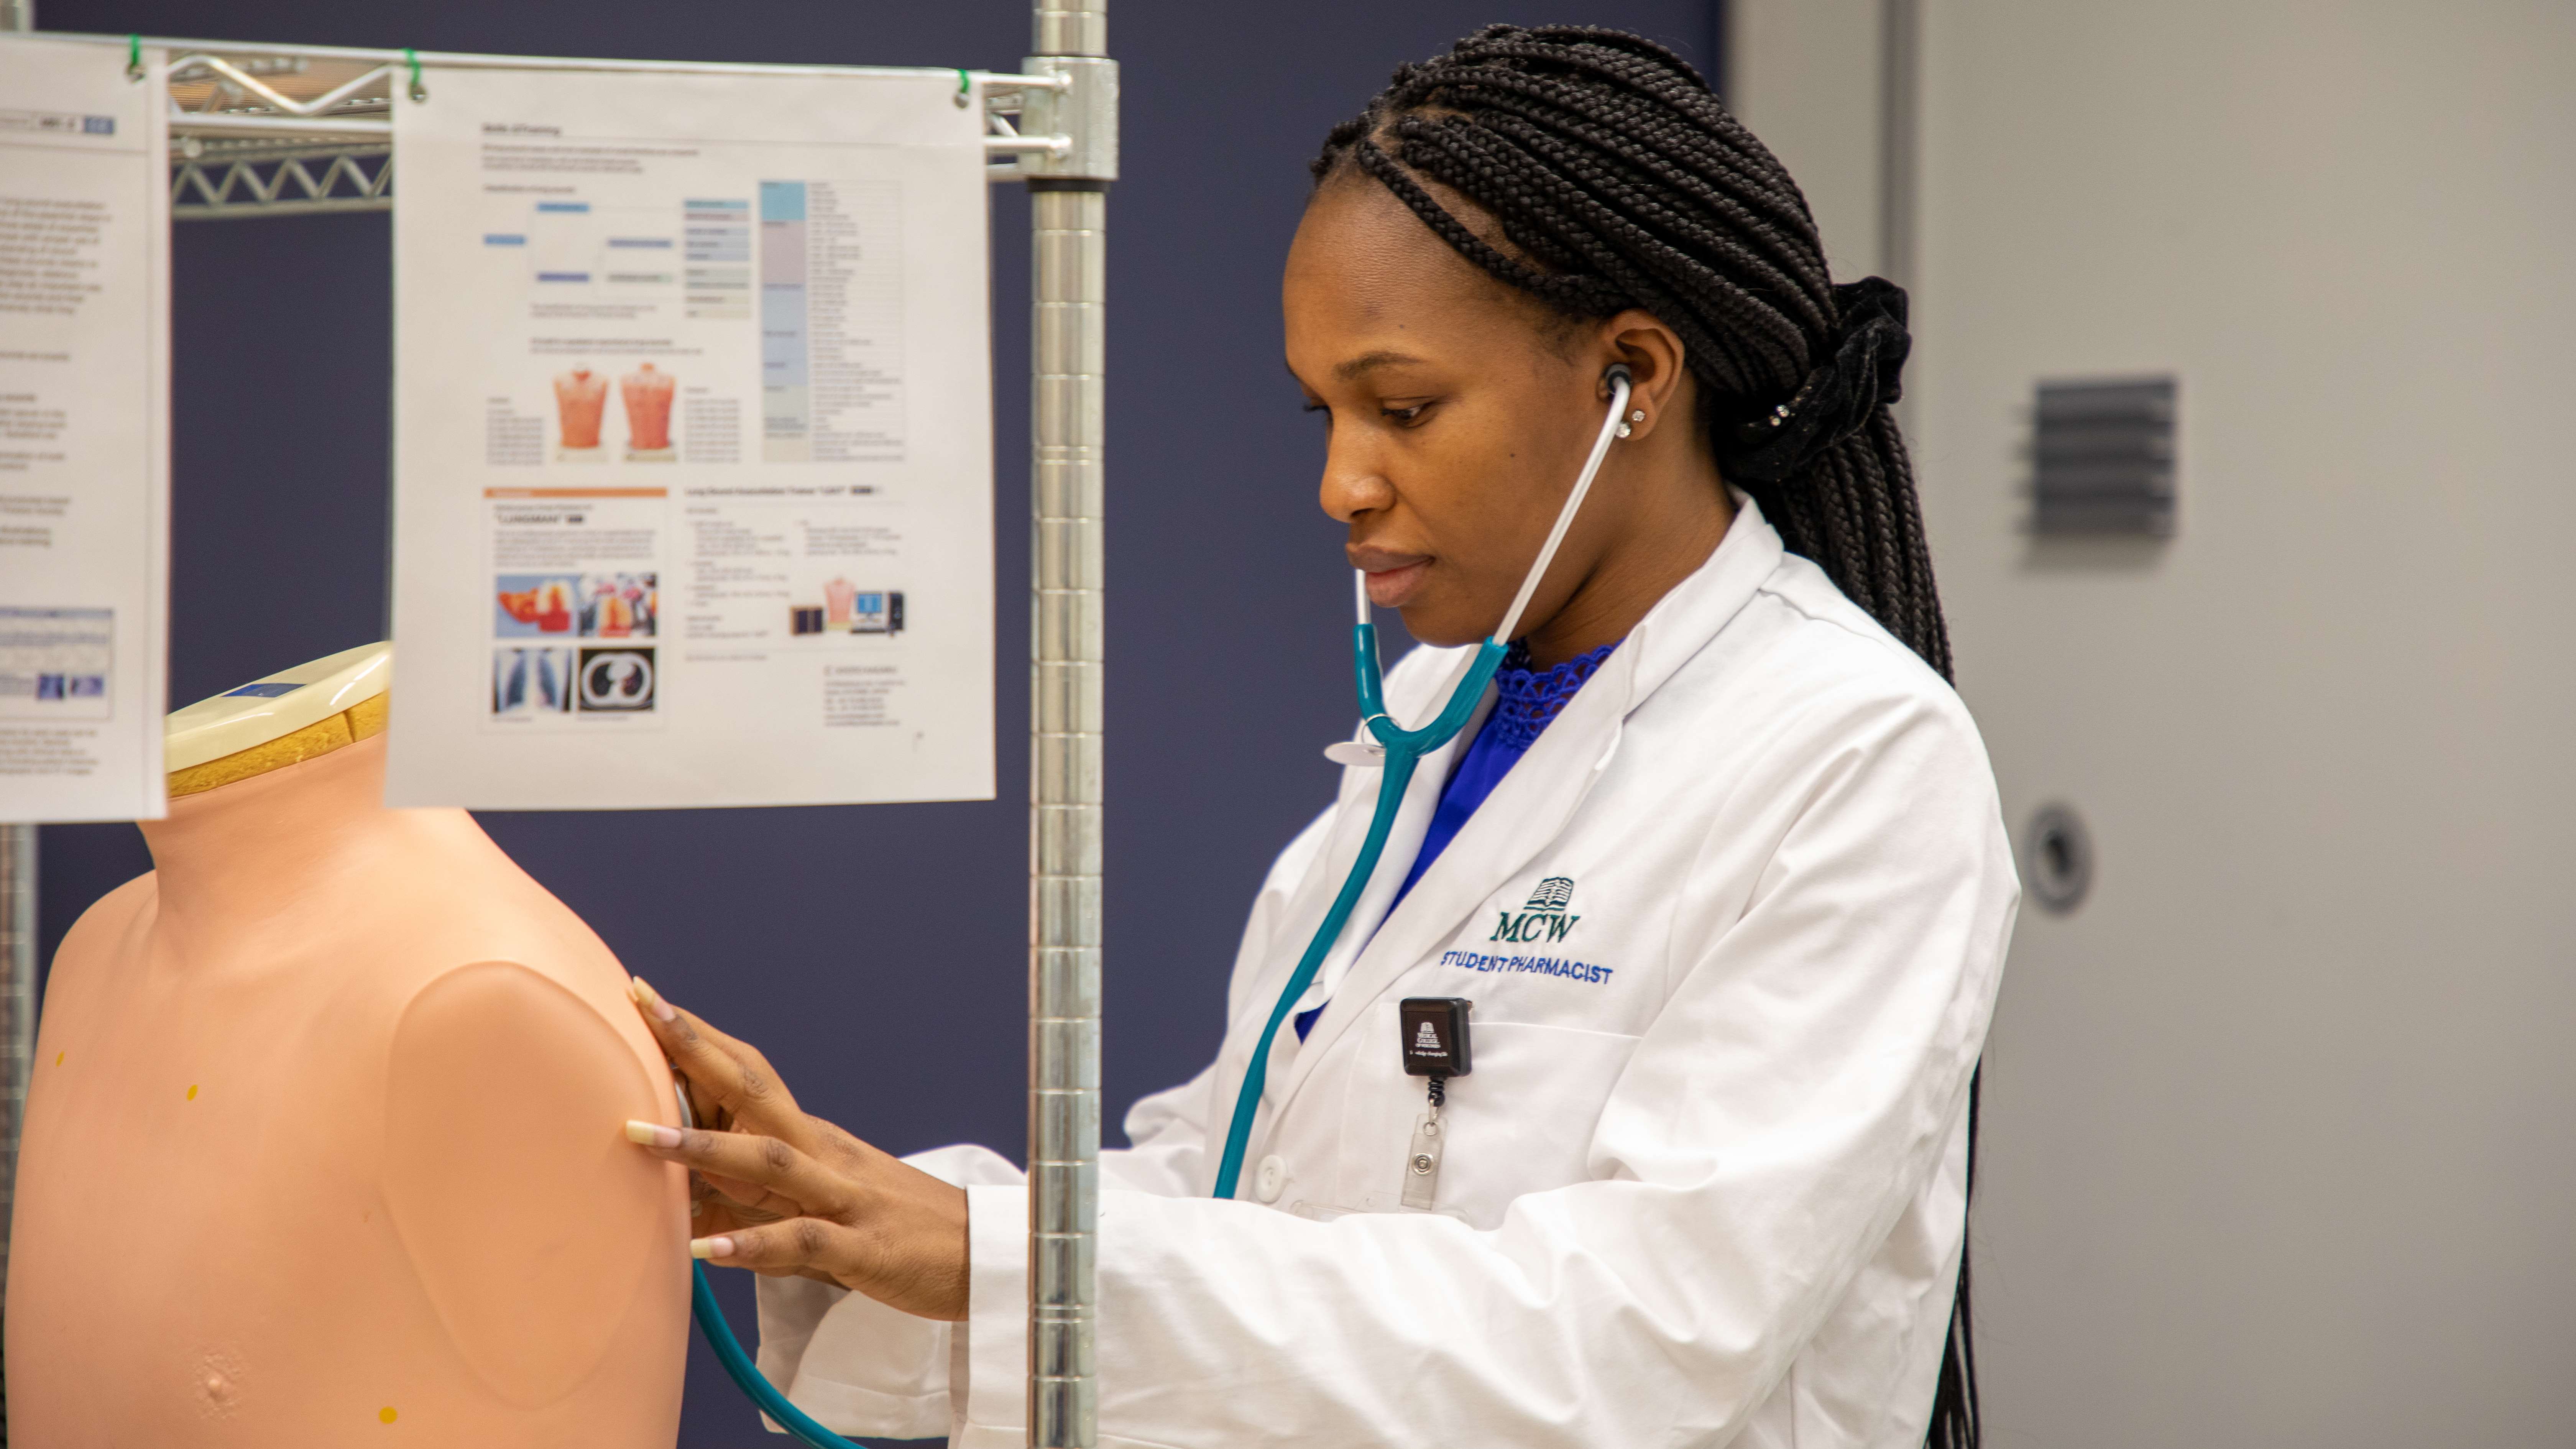 Girl in white lab coat uses a stethoscope to listen for lung sounds on a manikin.